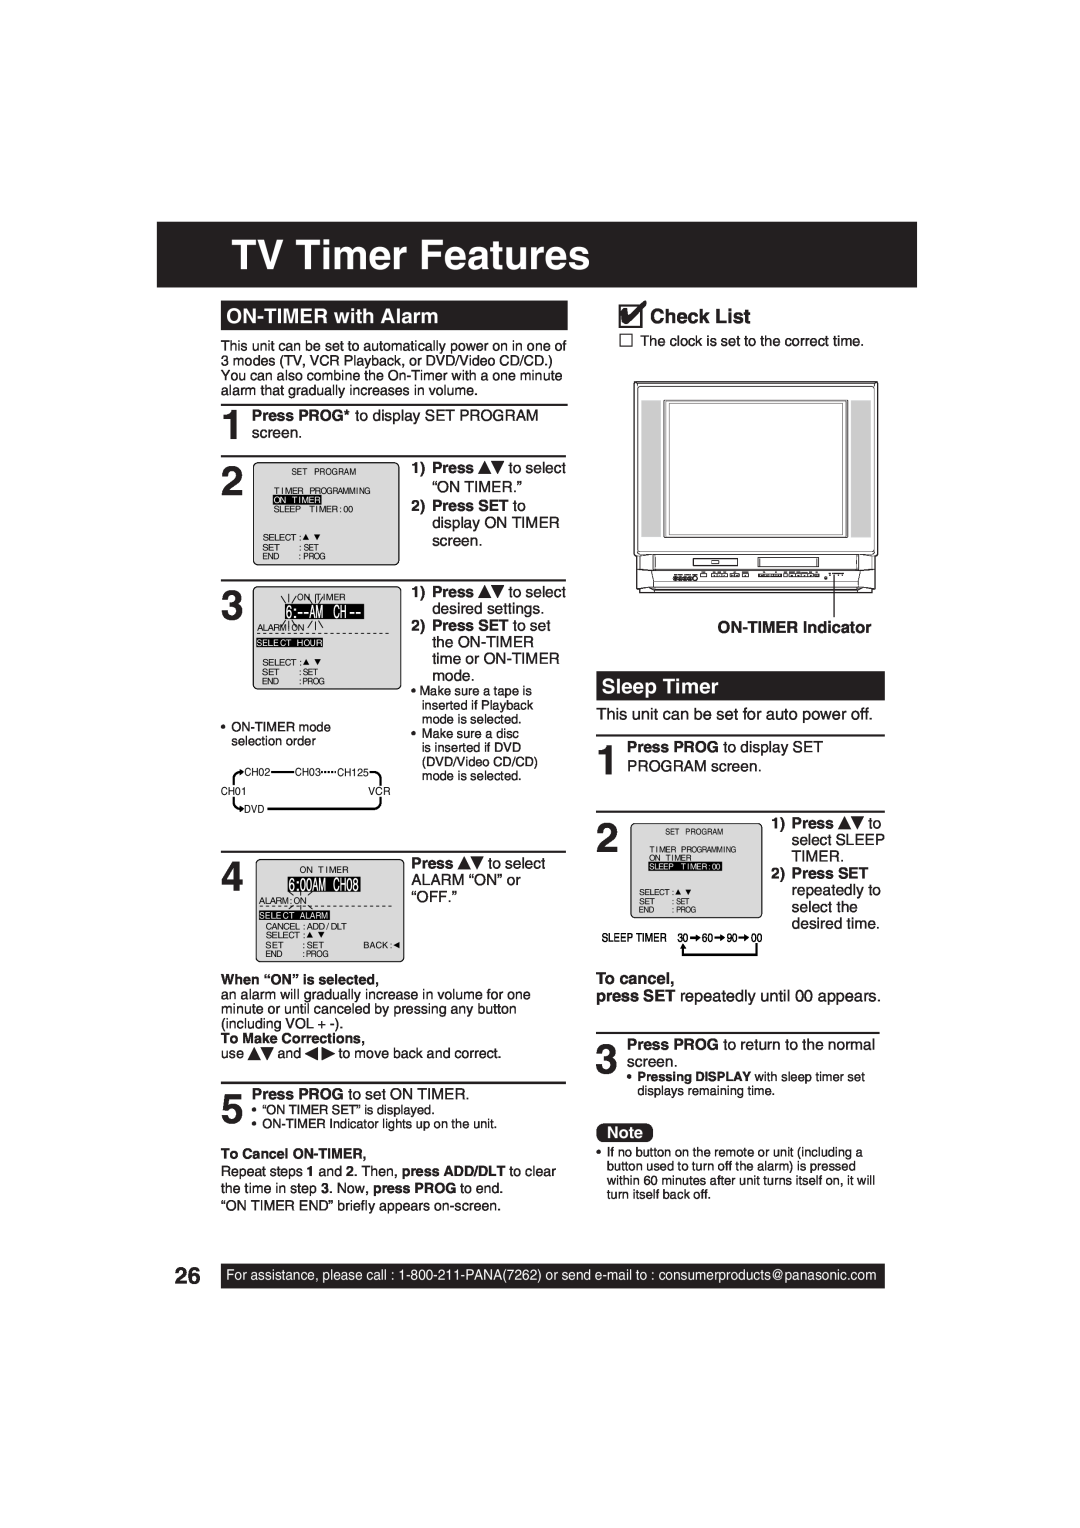 Panasonic PV-DF203 TV Timer Features, ON-TIMER with Alarm, Sleep Timer, ON-TIMER Indicator, To cancel, Check List, Press 